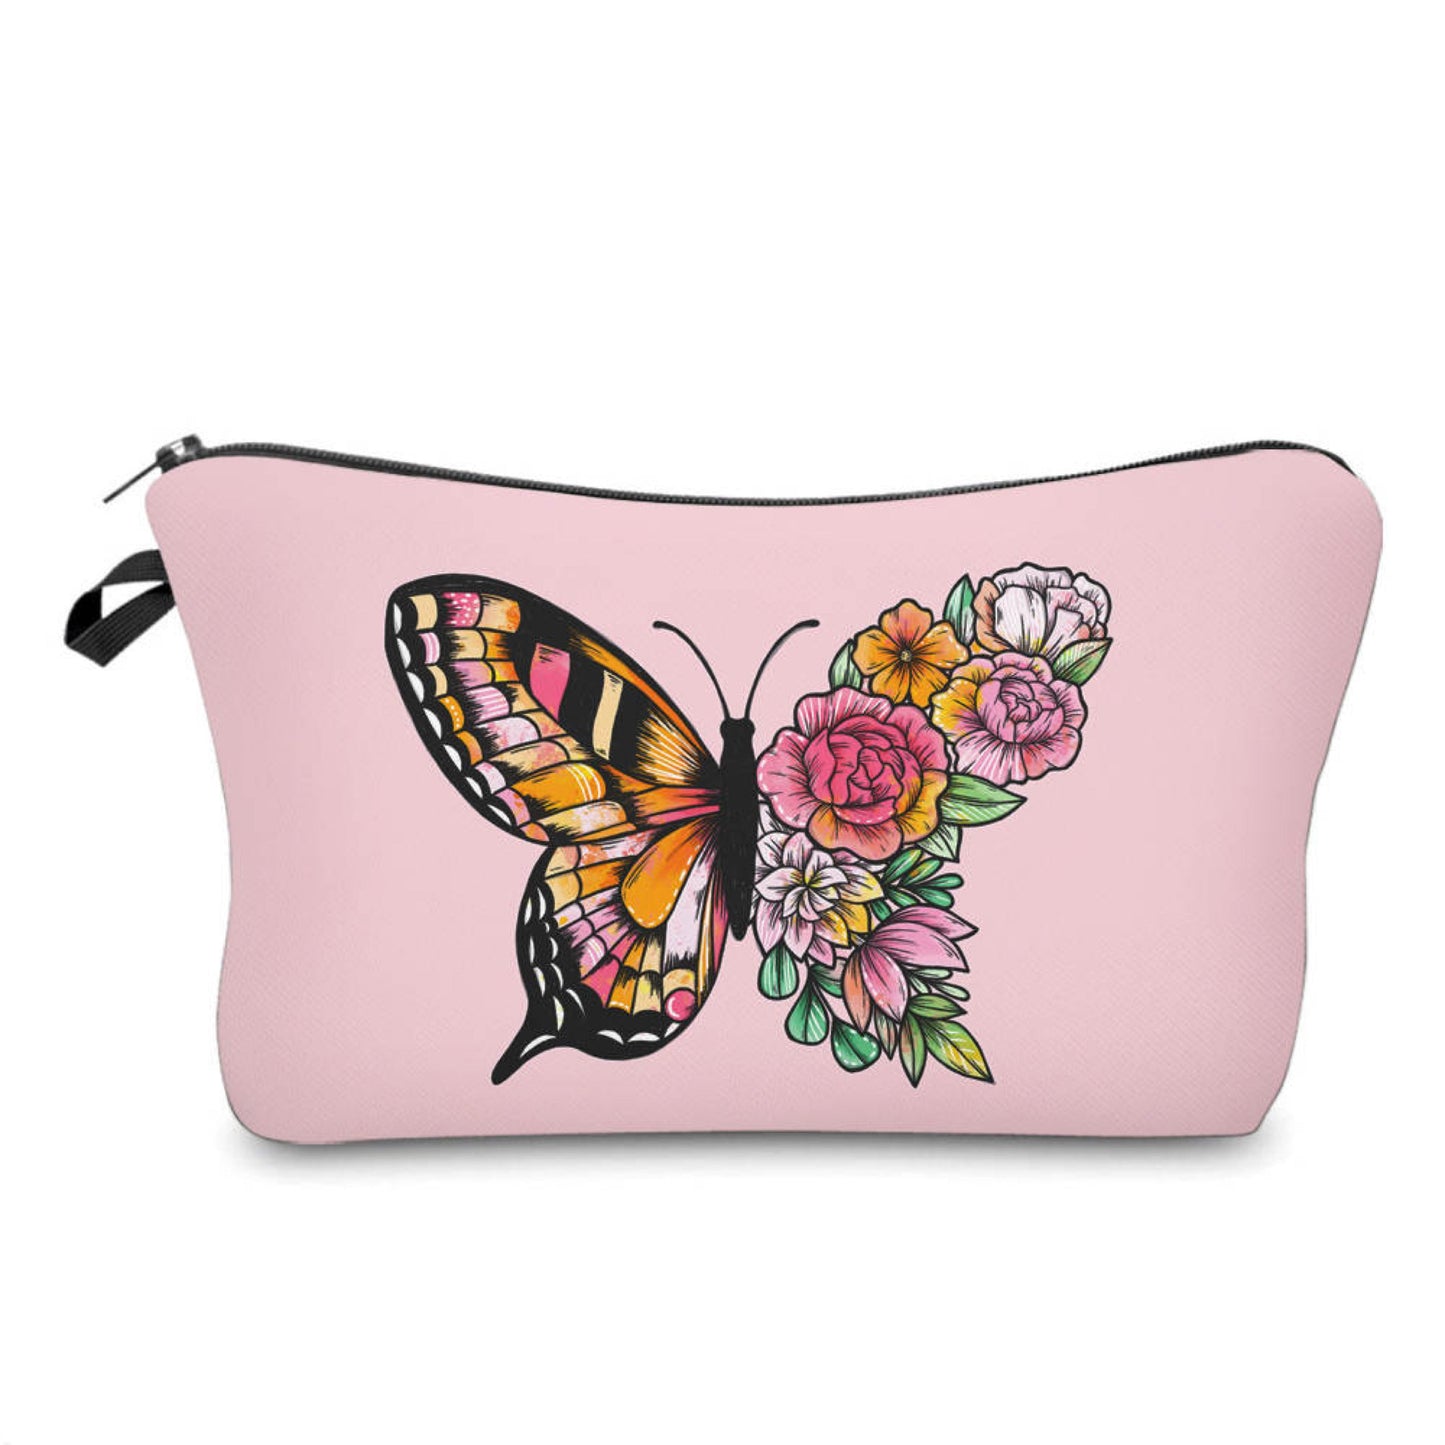 Pouch - Floral Butterfly